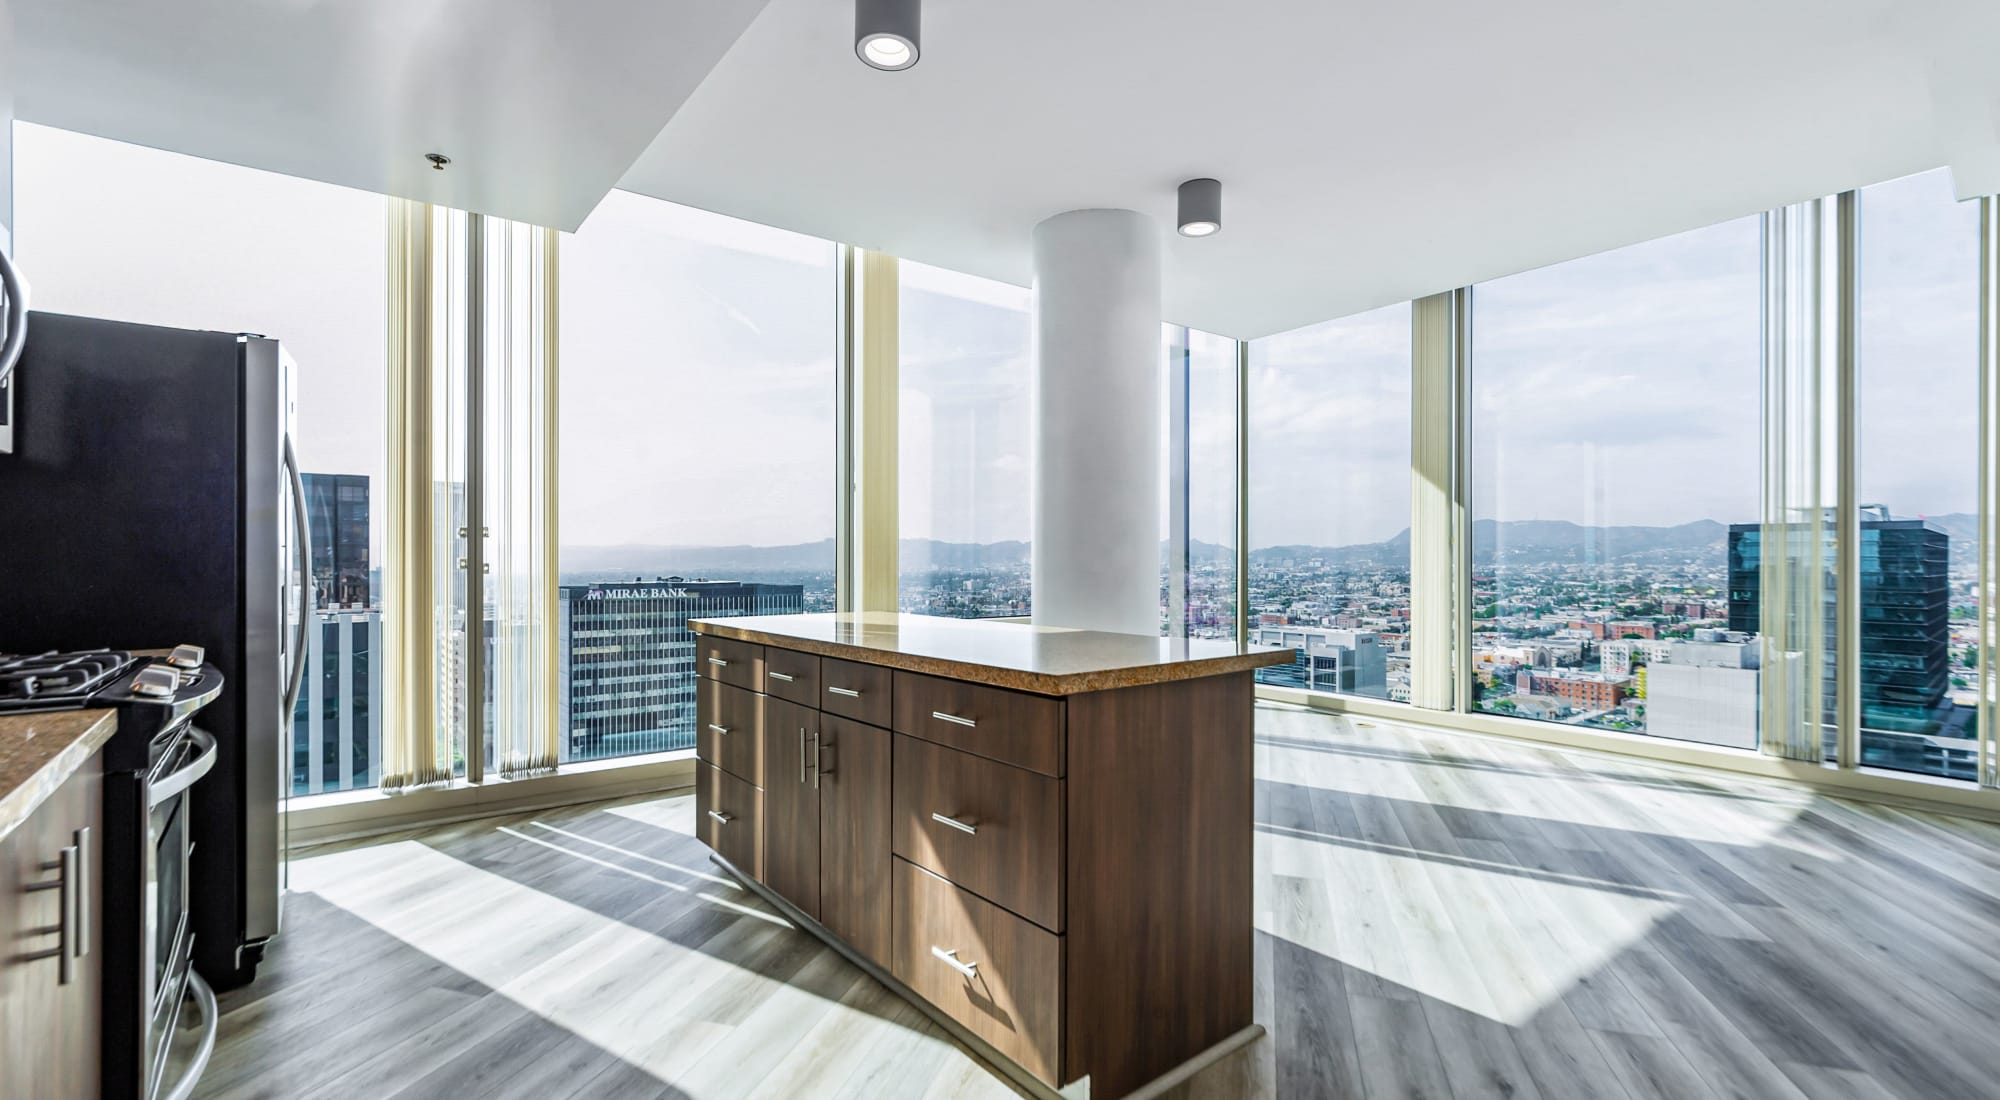 Model apartment with floor to ceiling windows at The Vermont in Los Angeles, California